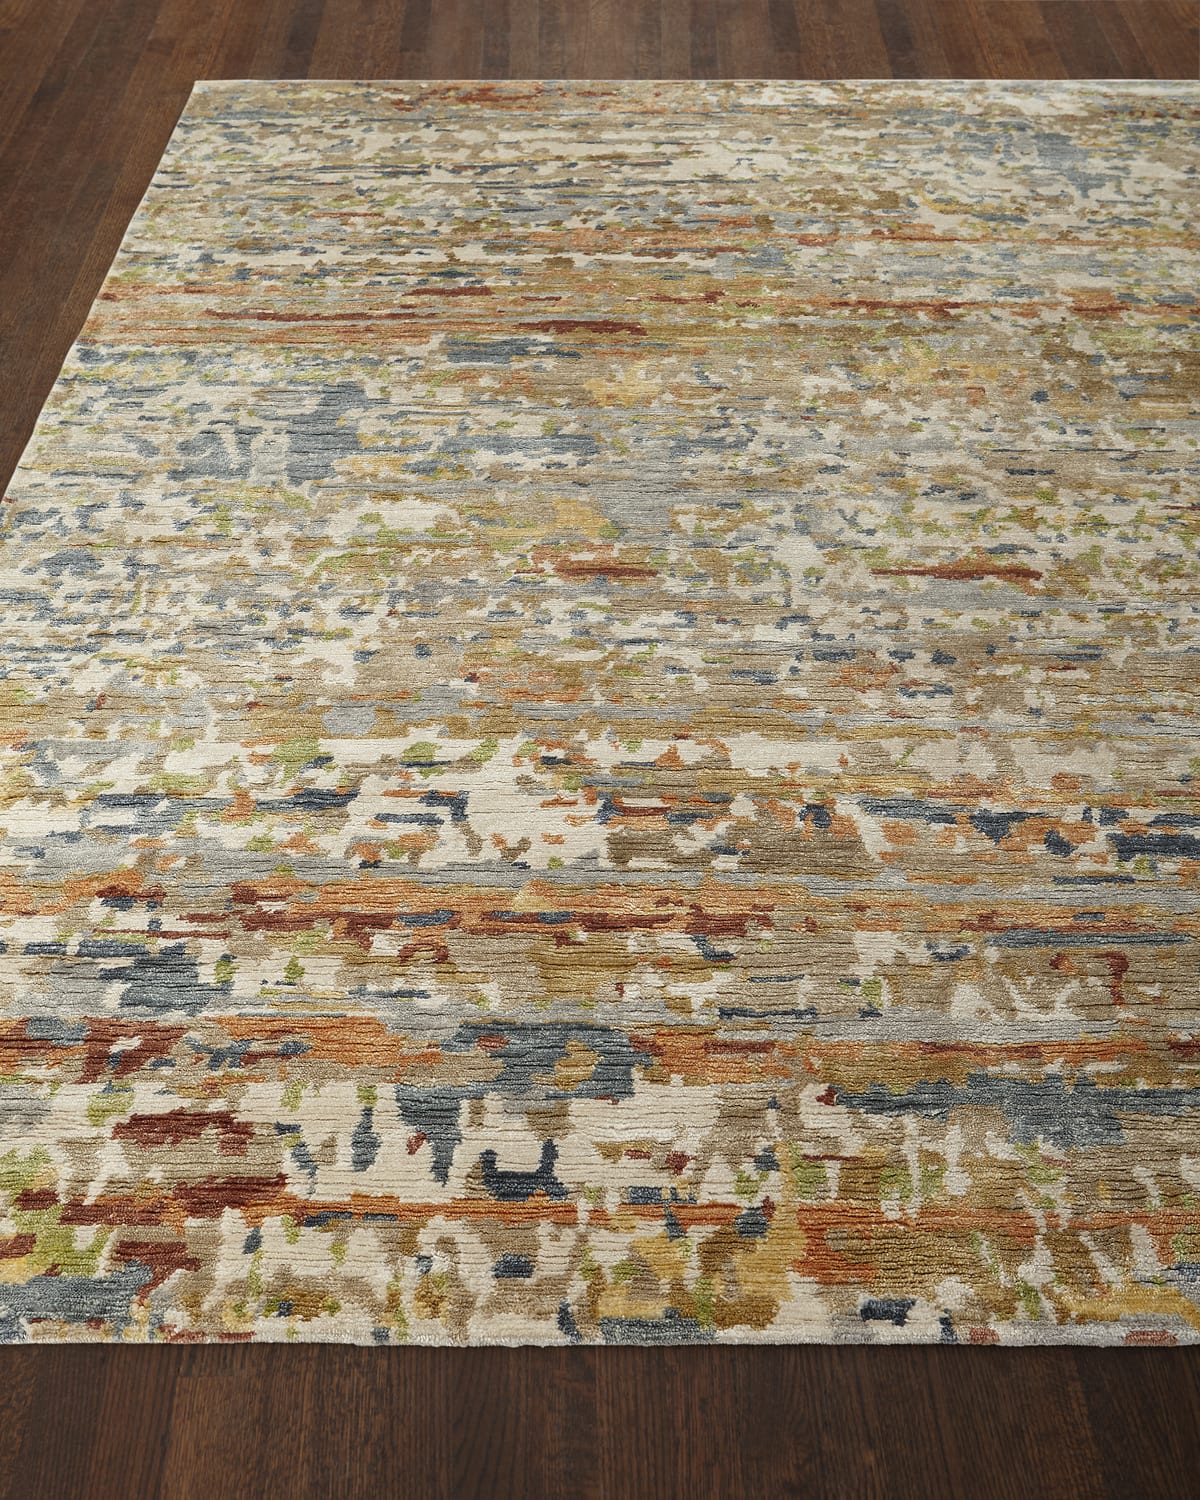 Image Jeffrey Hand-Knotted Area Rug, 10' x 14'